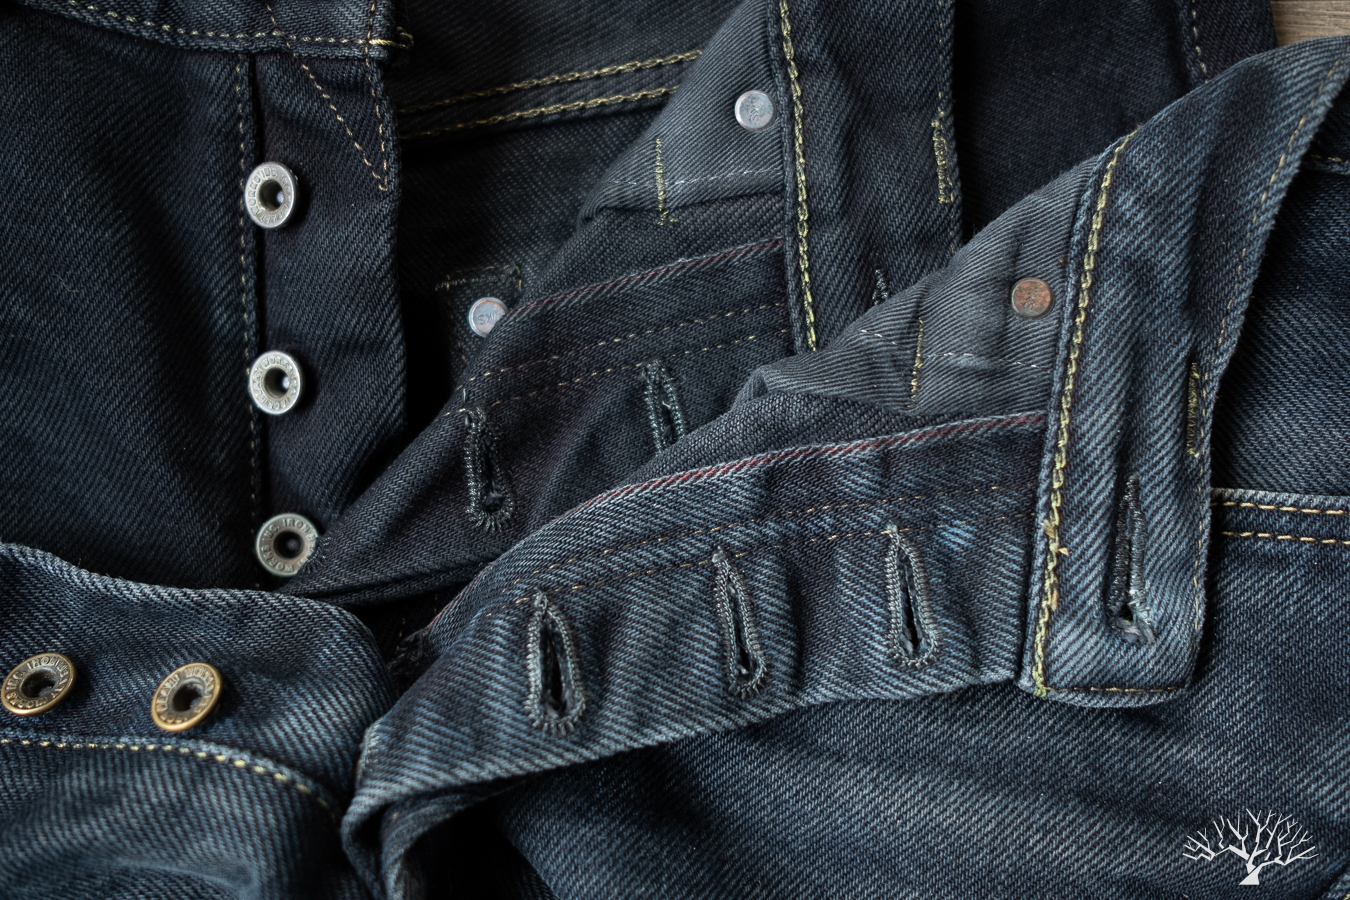 Iron Heart 21oz overdyed black selvedge denim pair compared to a brand new pair, inside the button fly selvedge ticker